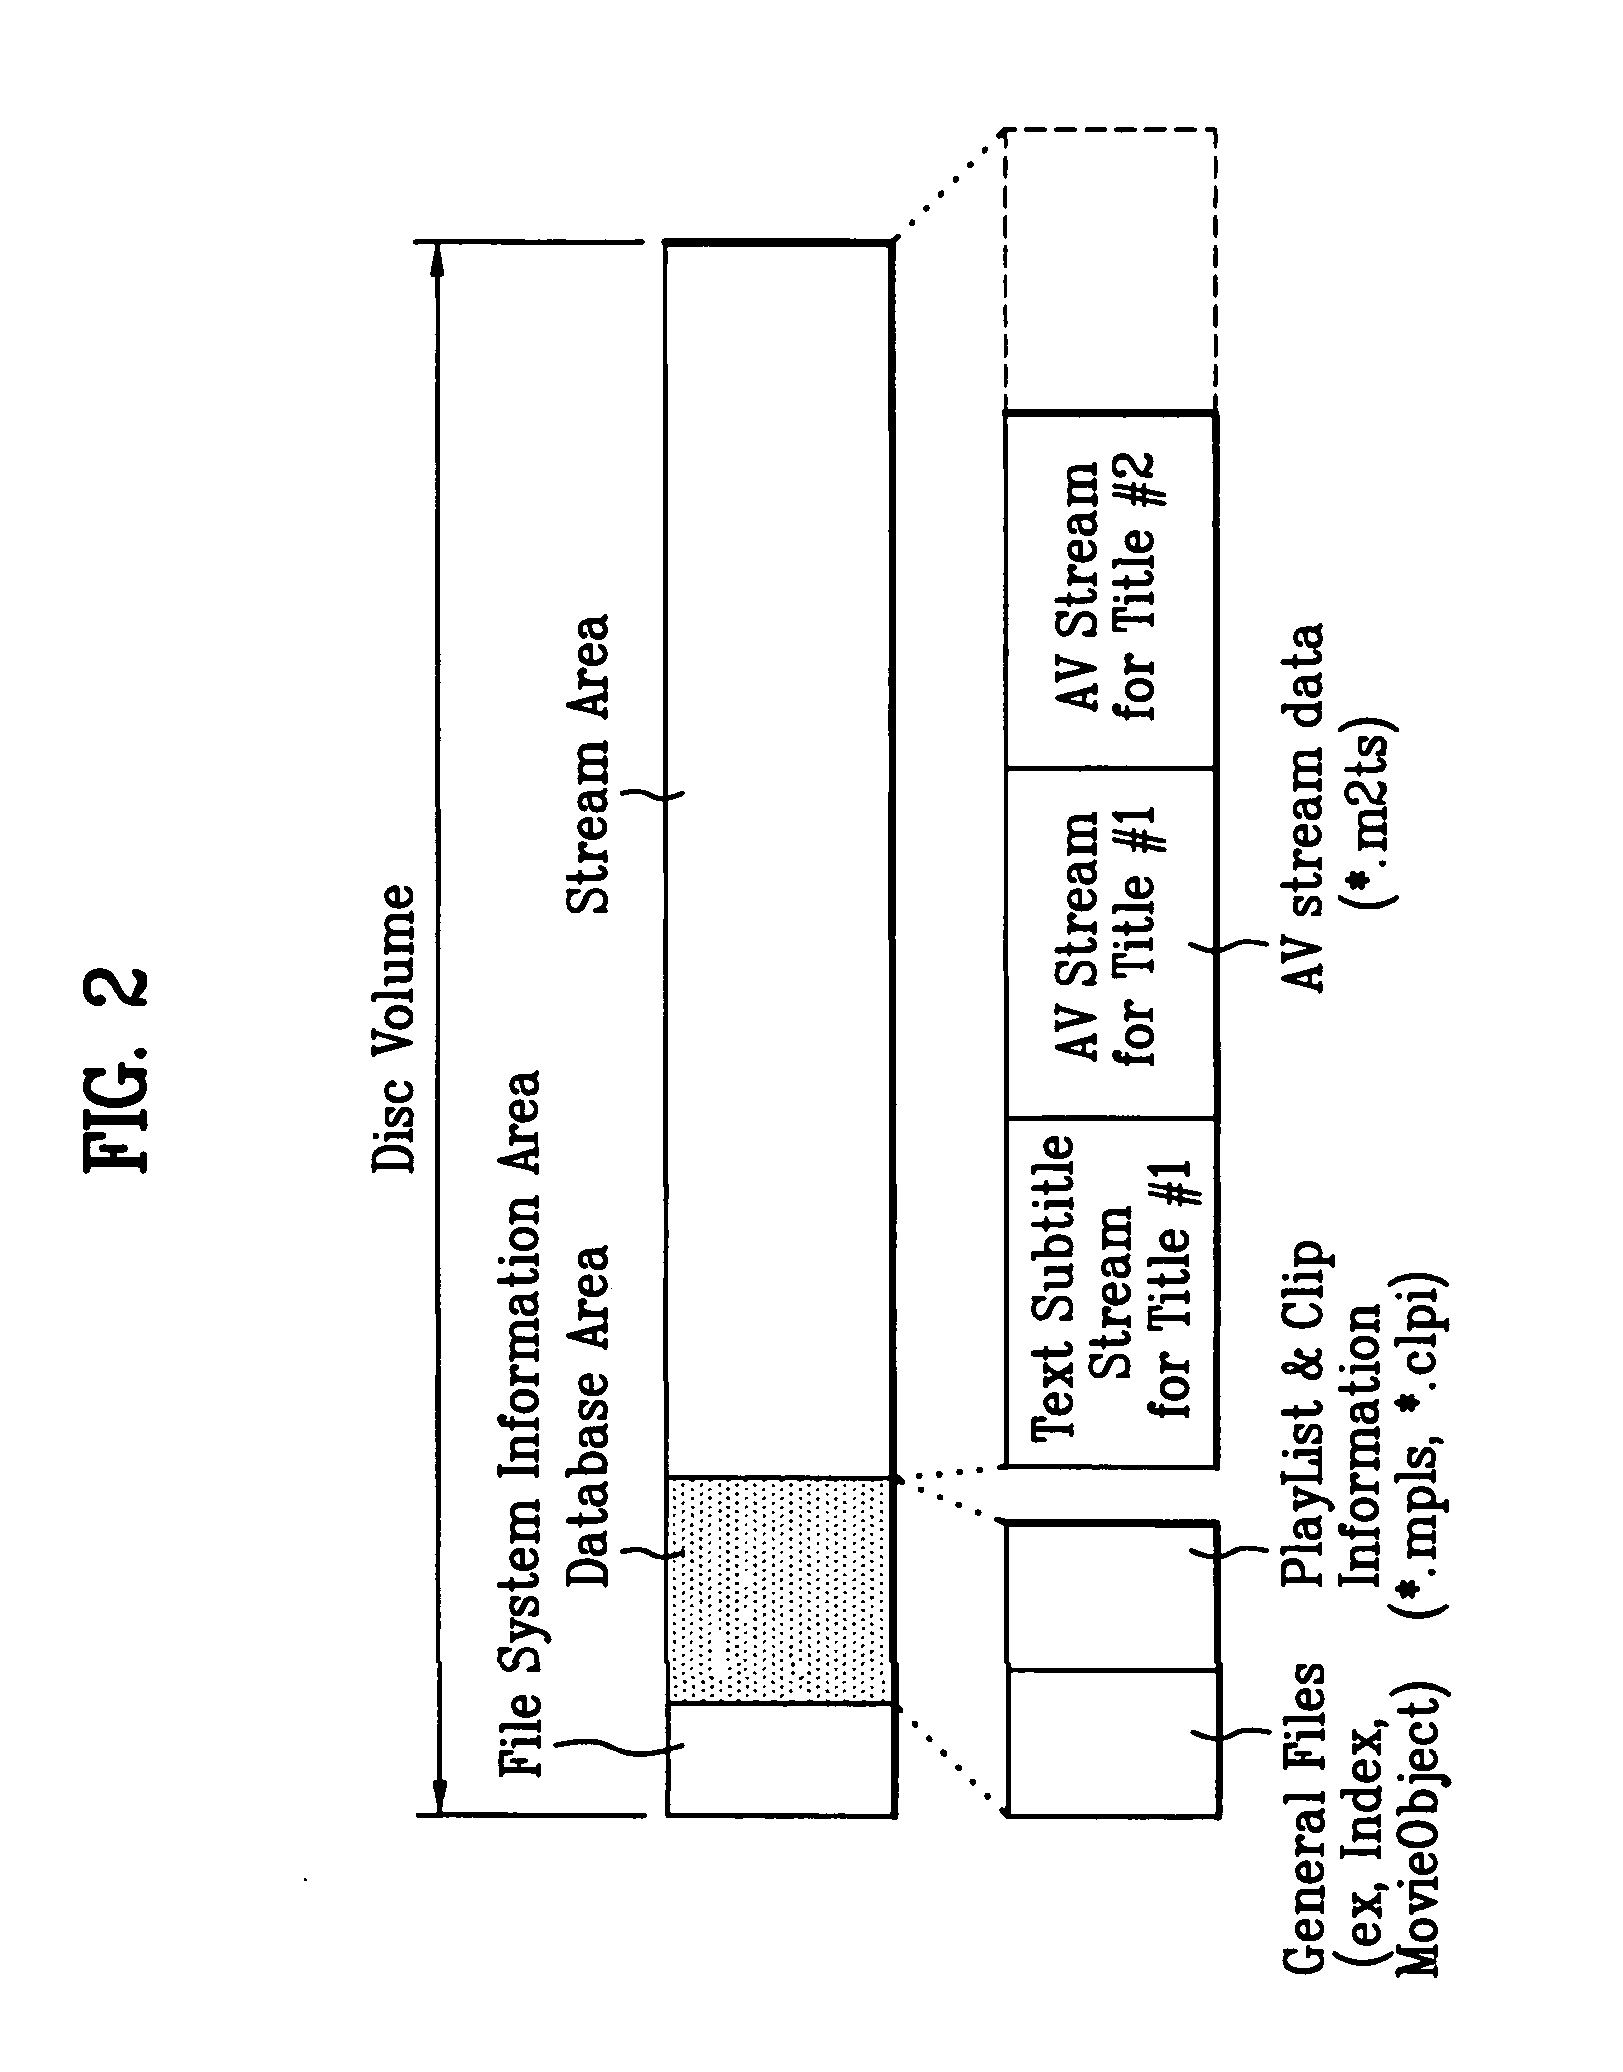 Recording medium having a data structure for managing reproduction of text subtitle data and methods and apparatuses associated therewith